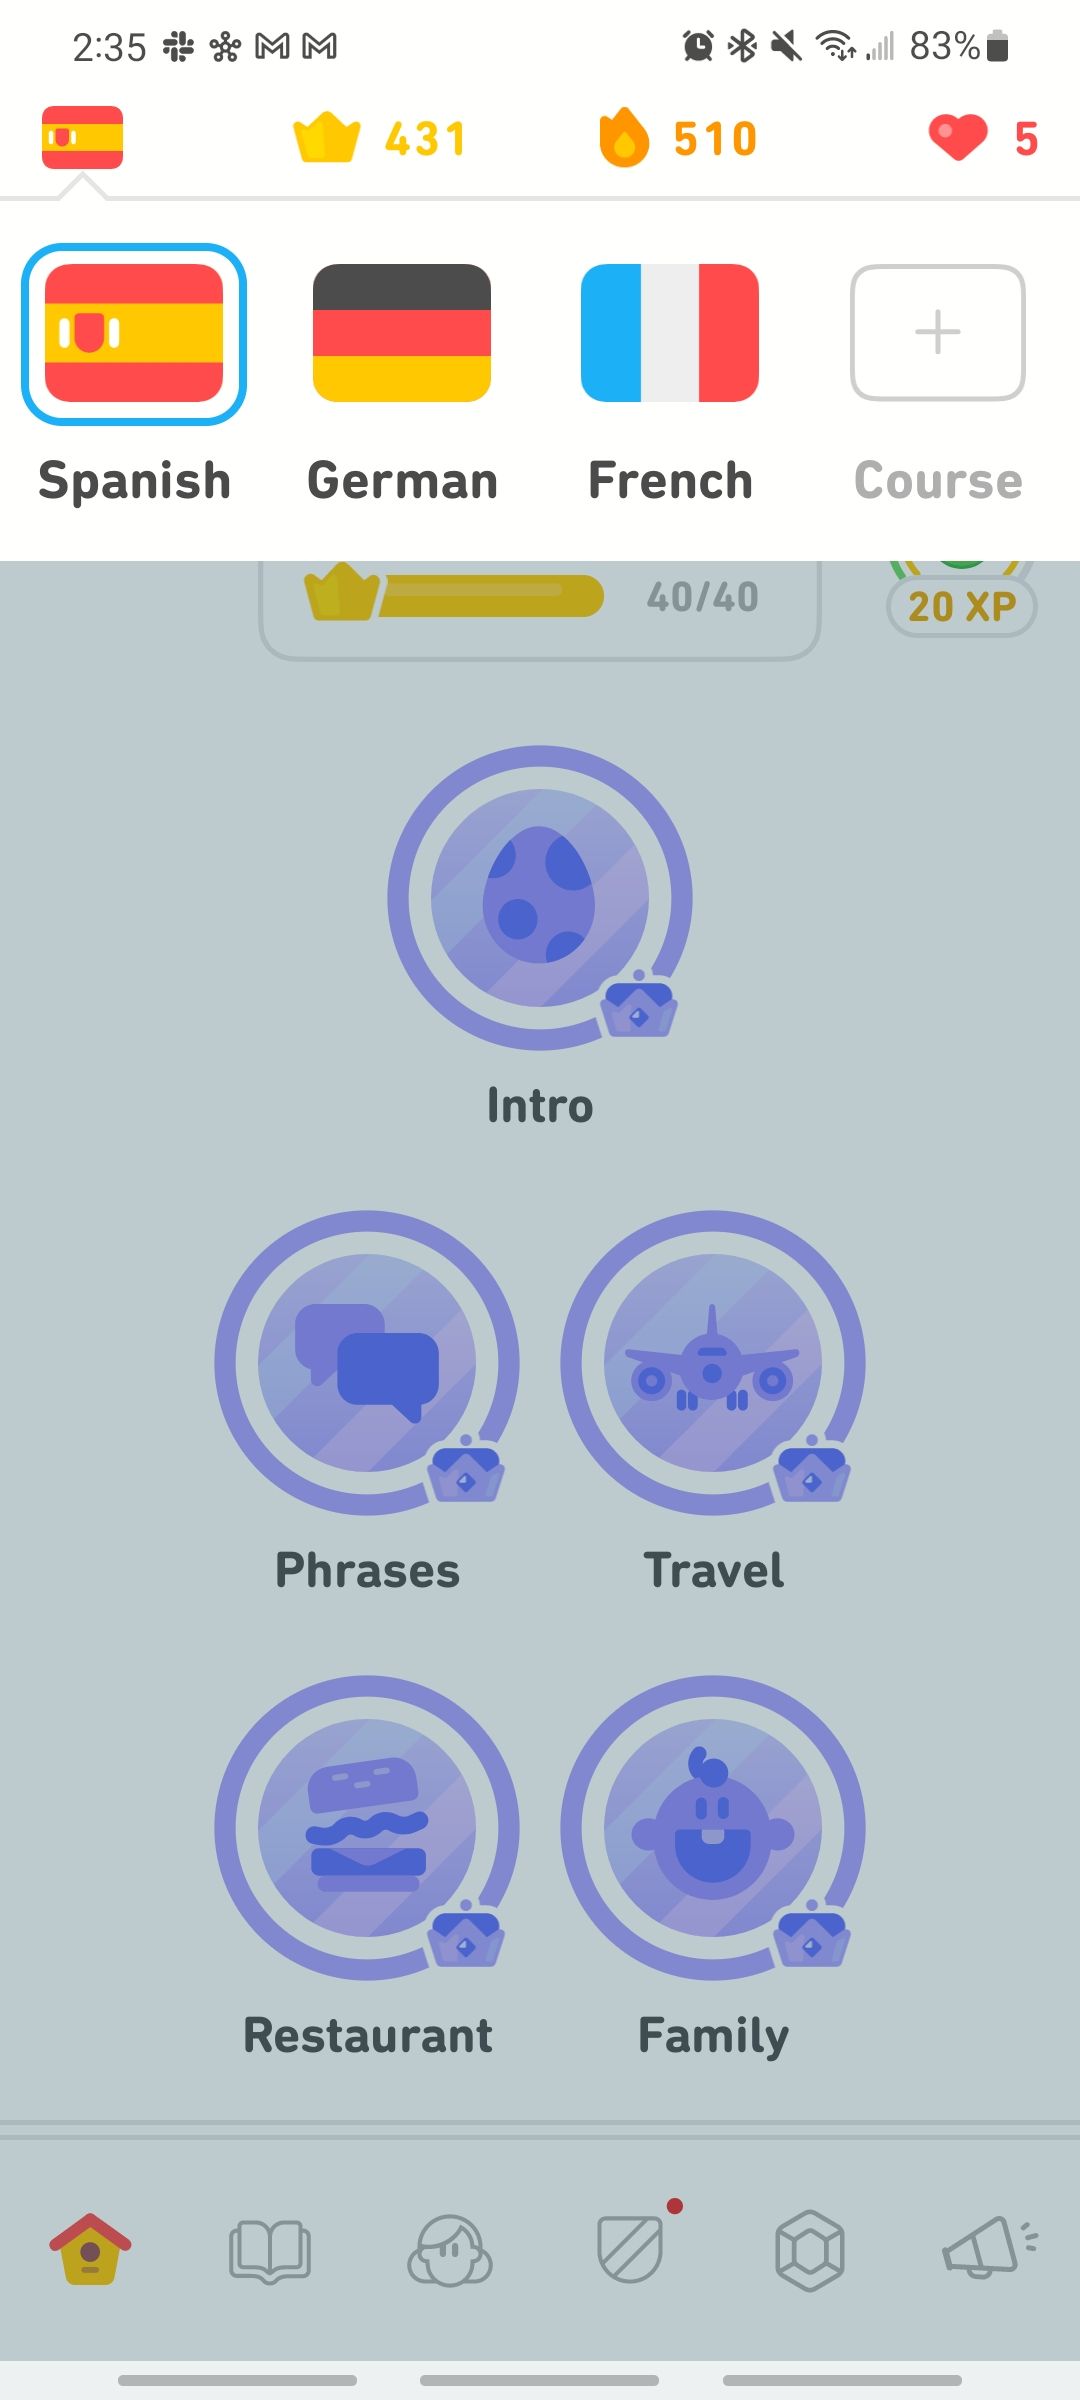 duolingo app displaying learning spanish, french, and german at the same time